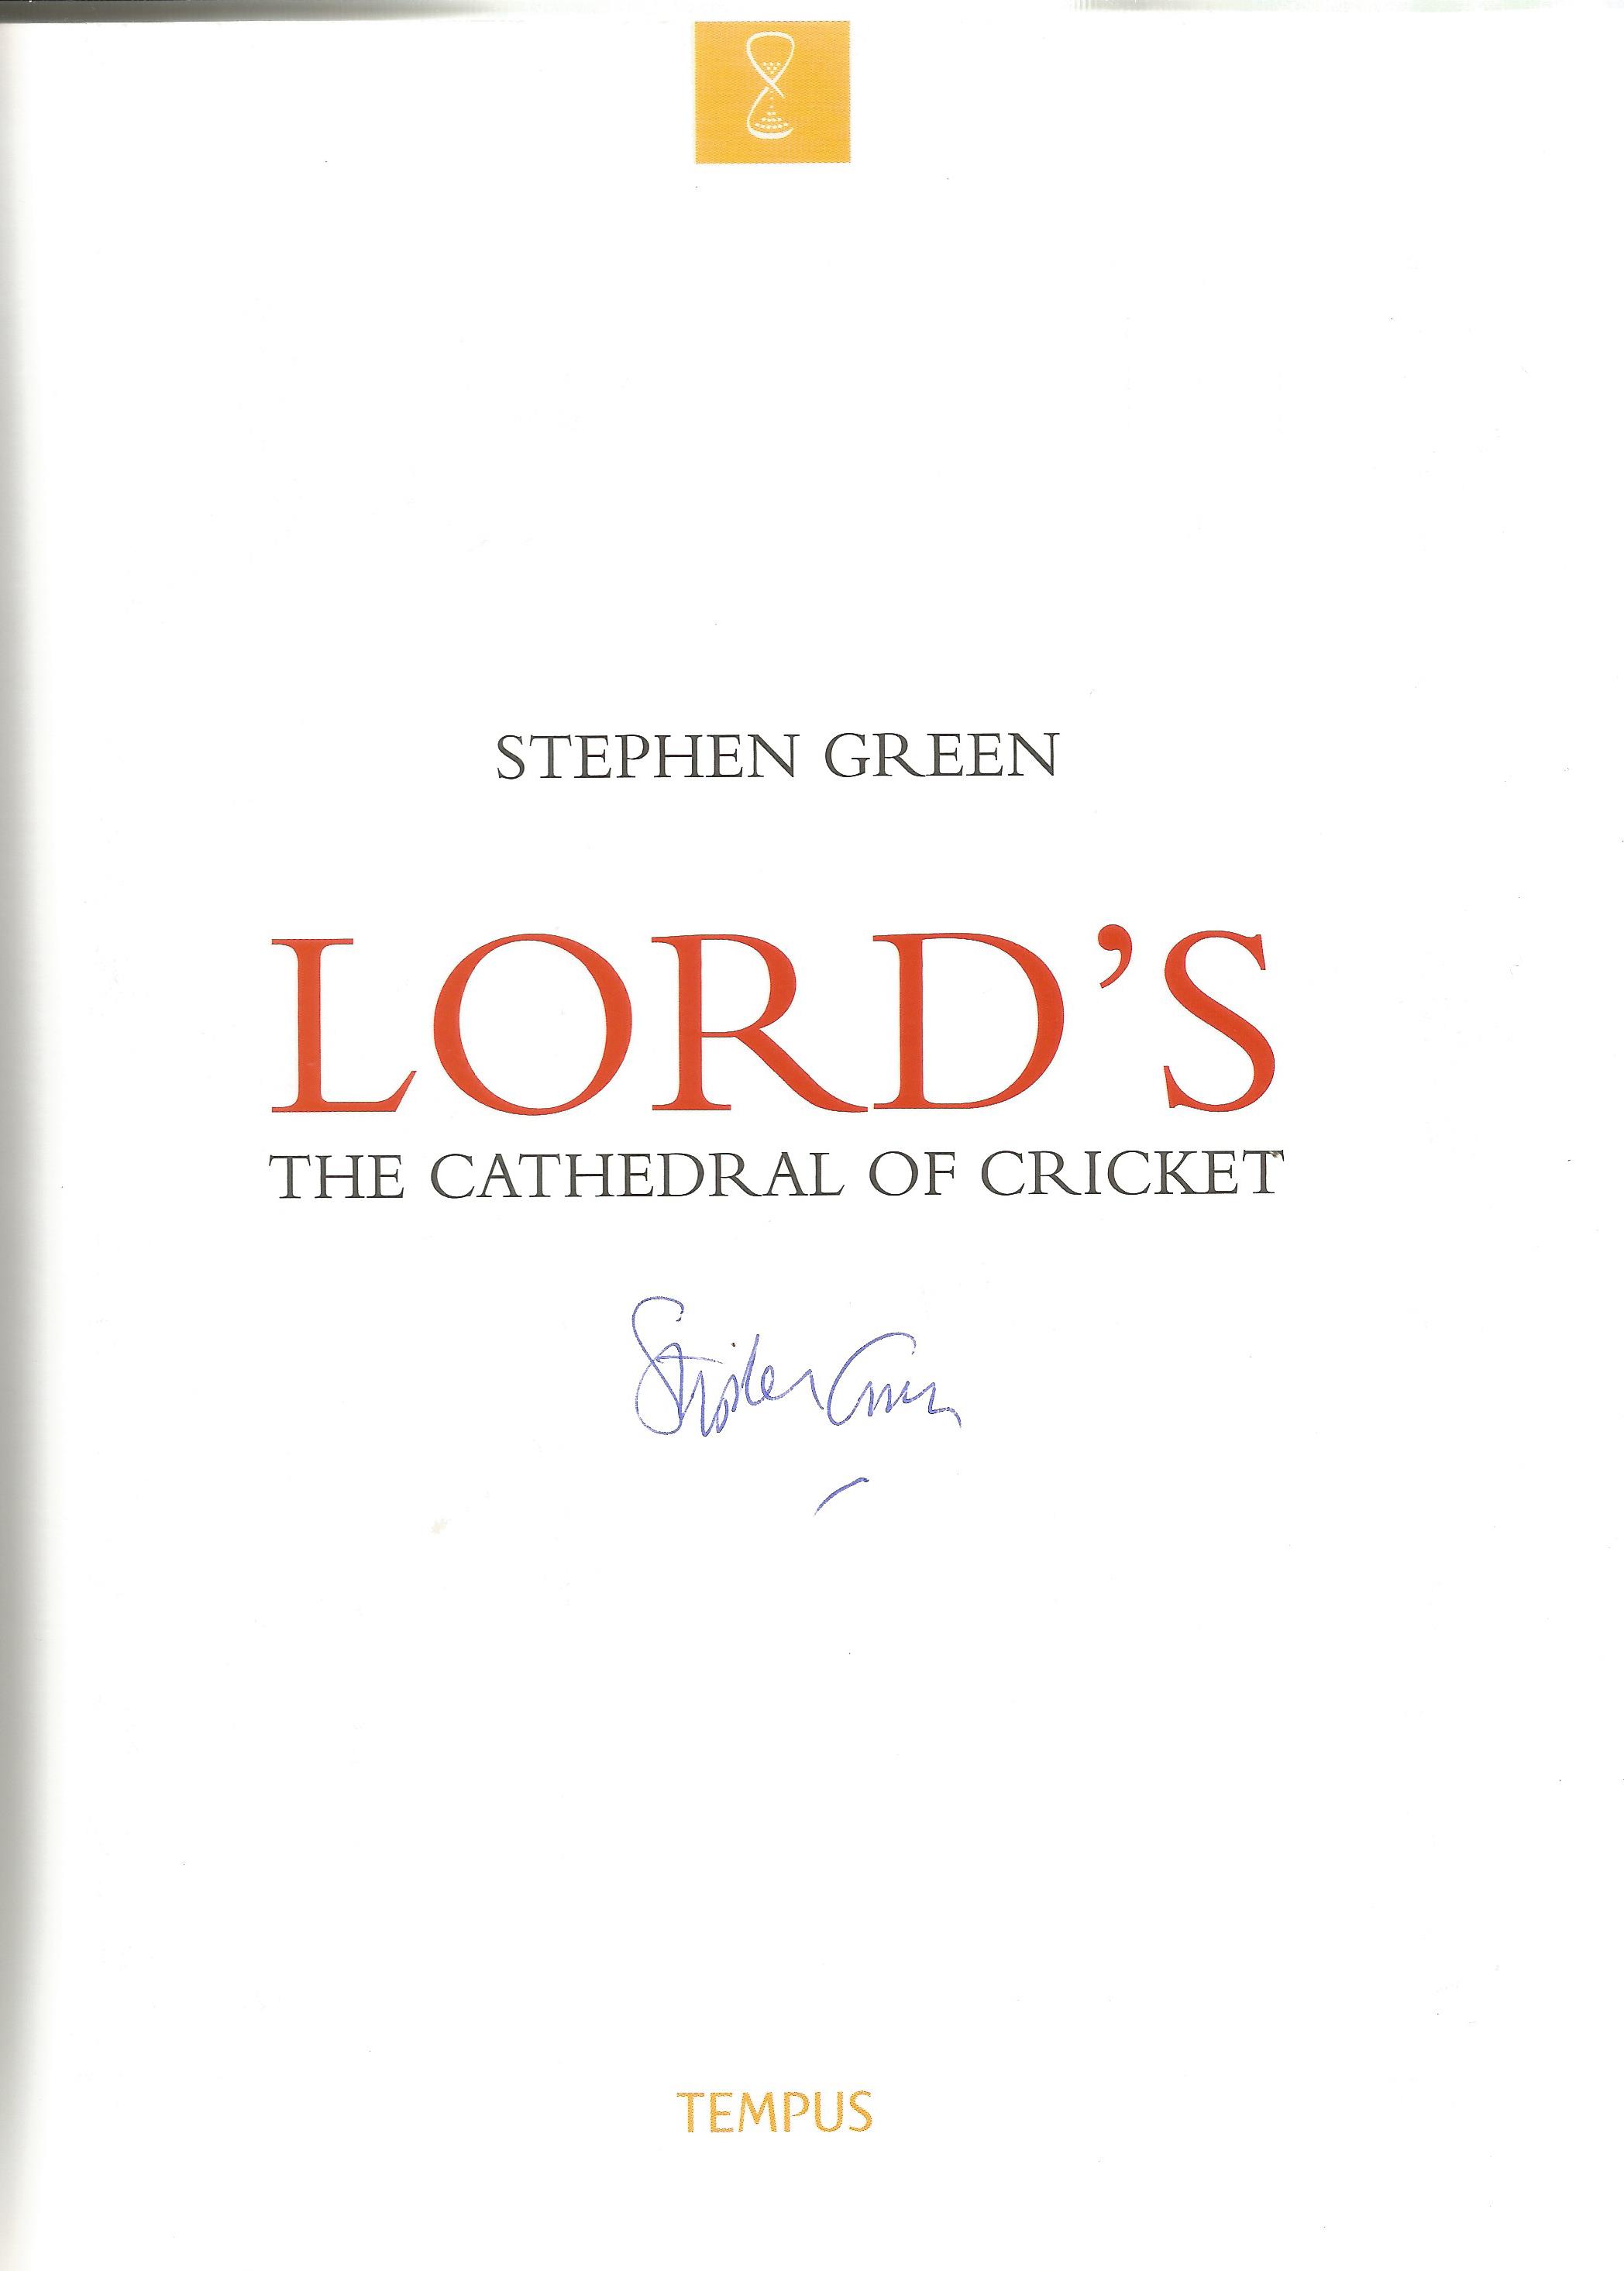 Signed Book Lords The Cathedral of Cricket by Stephen Green 2003 First Edition Hardback Book - Image 2 of 3